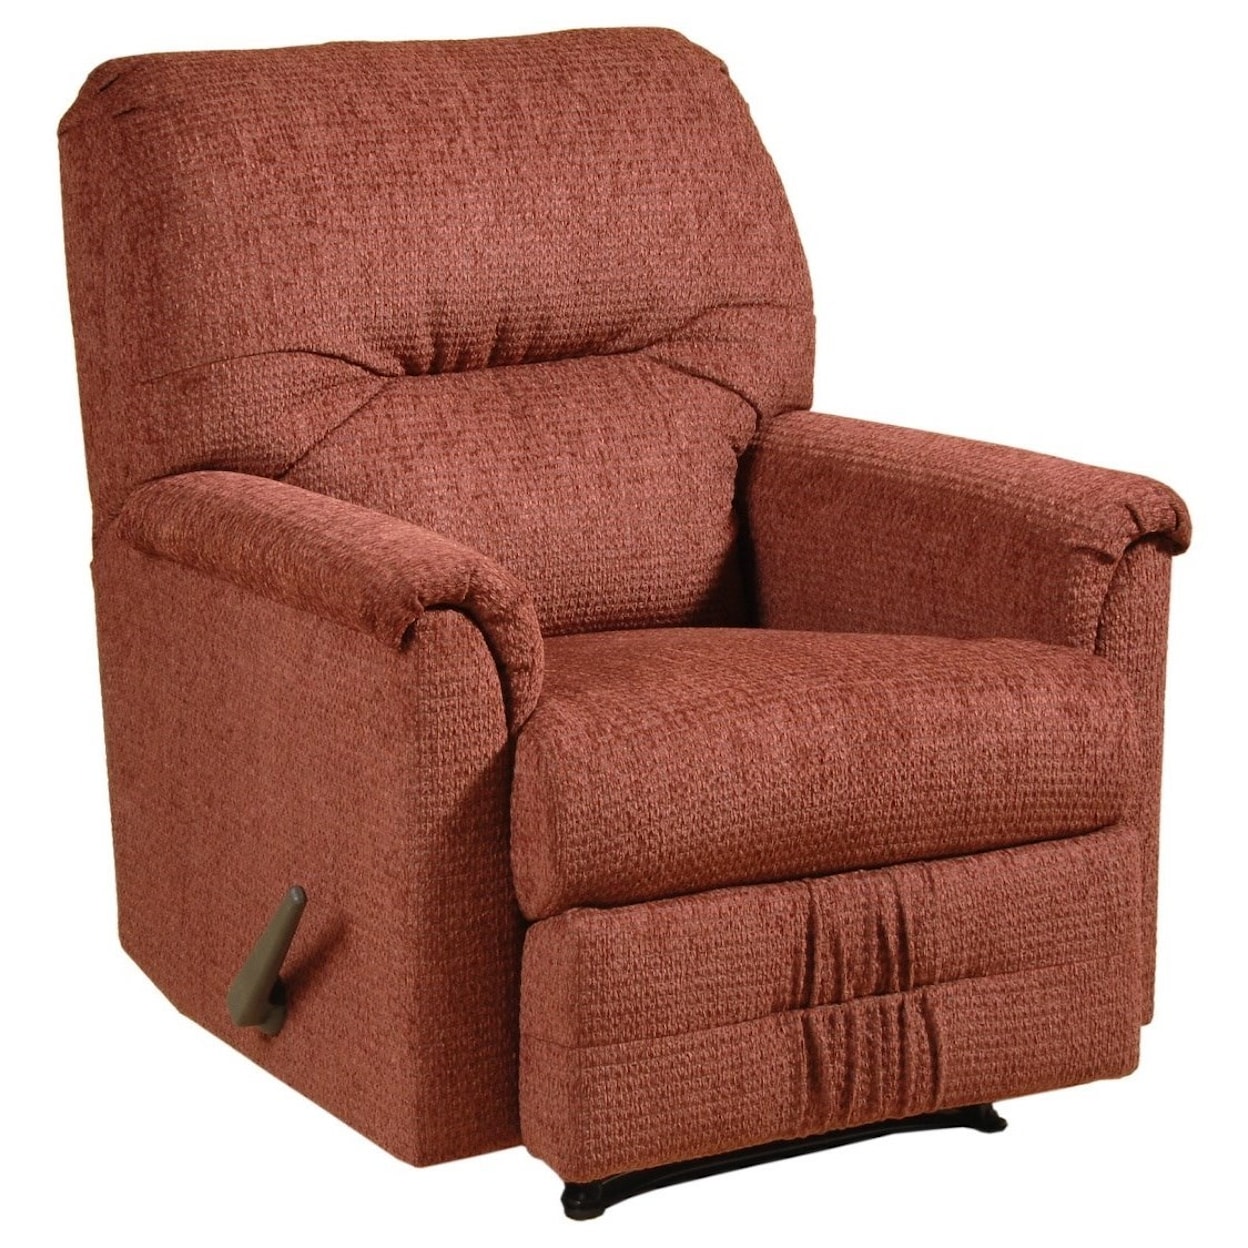 Serta Upholstery by Hughes Furniture 100 Recliner